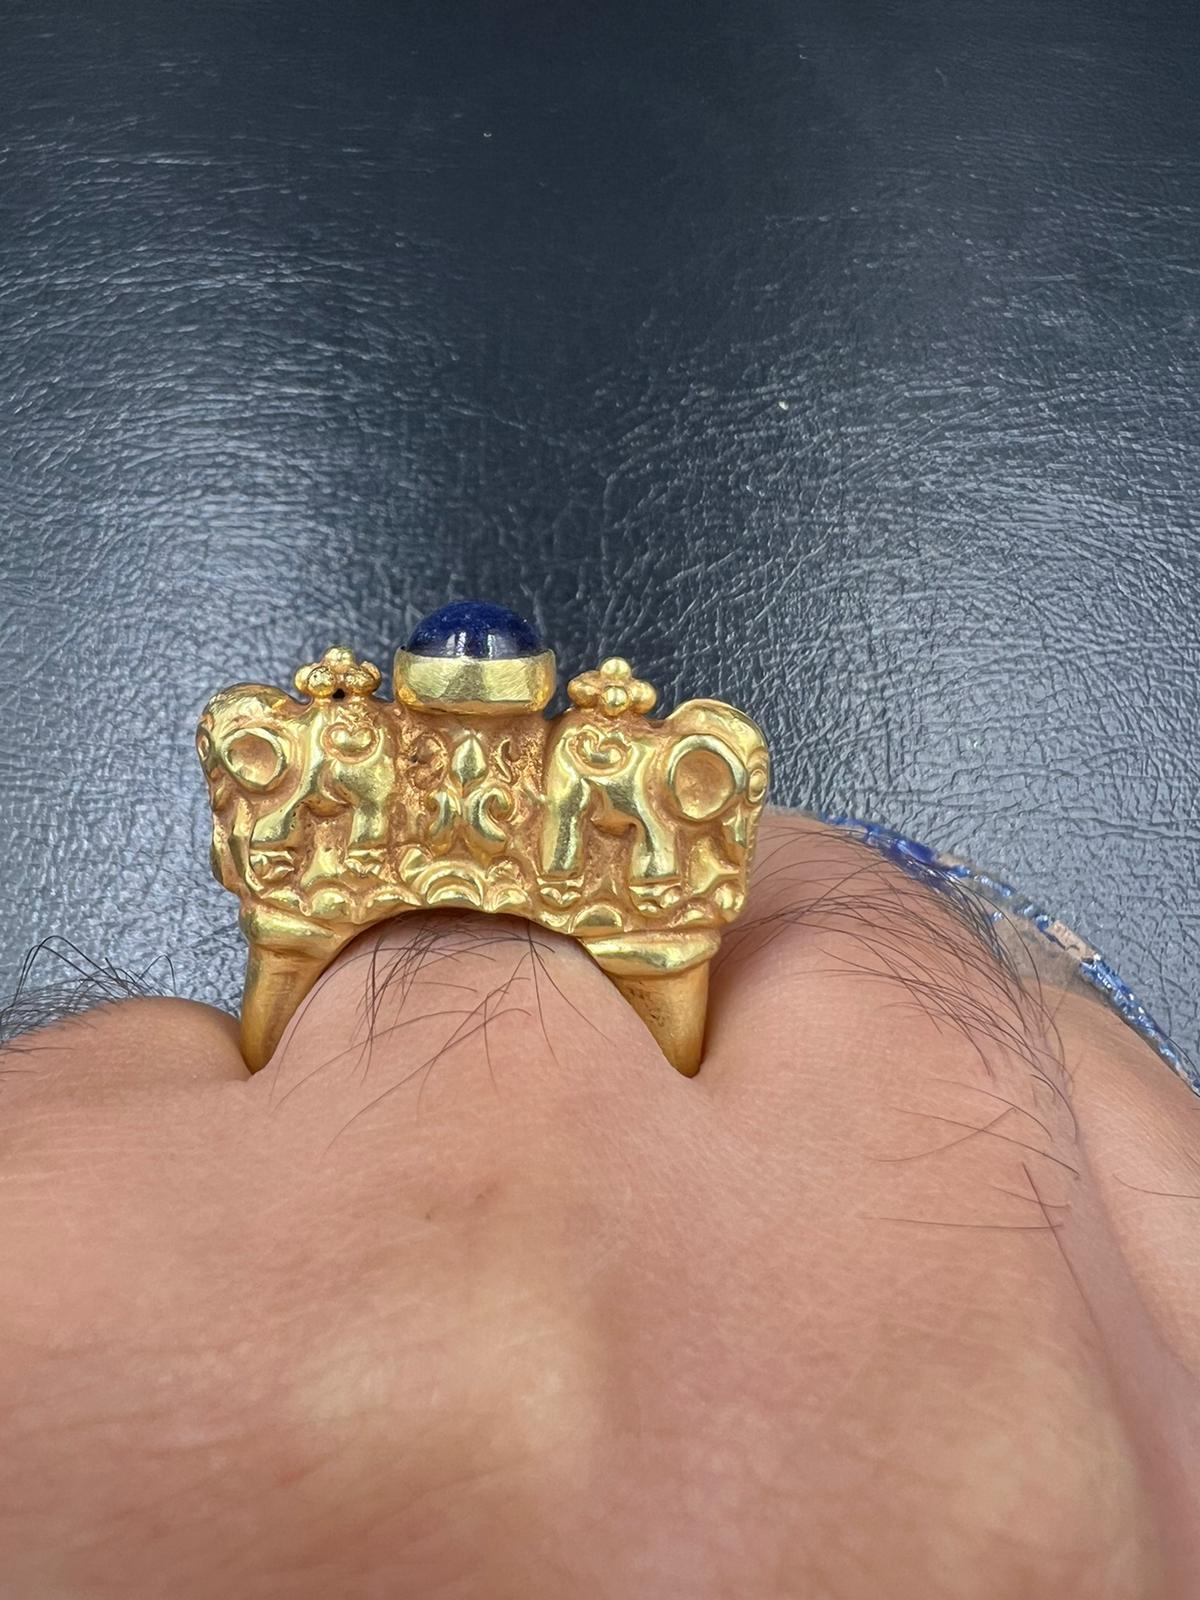 Bochic Curated Antique Ring From Burma 18k Solid Gold & Antique Lapis Lazuli In Excellent Condition For Sale In New York, NY